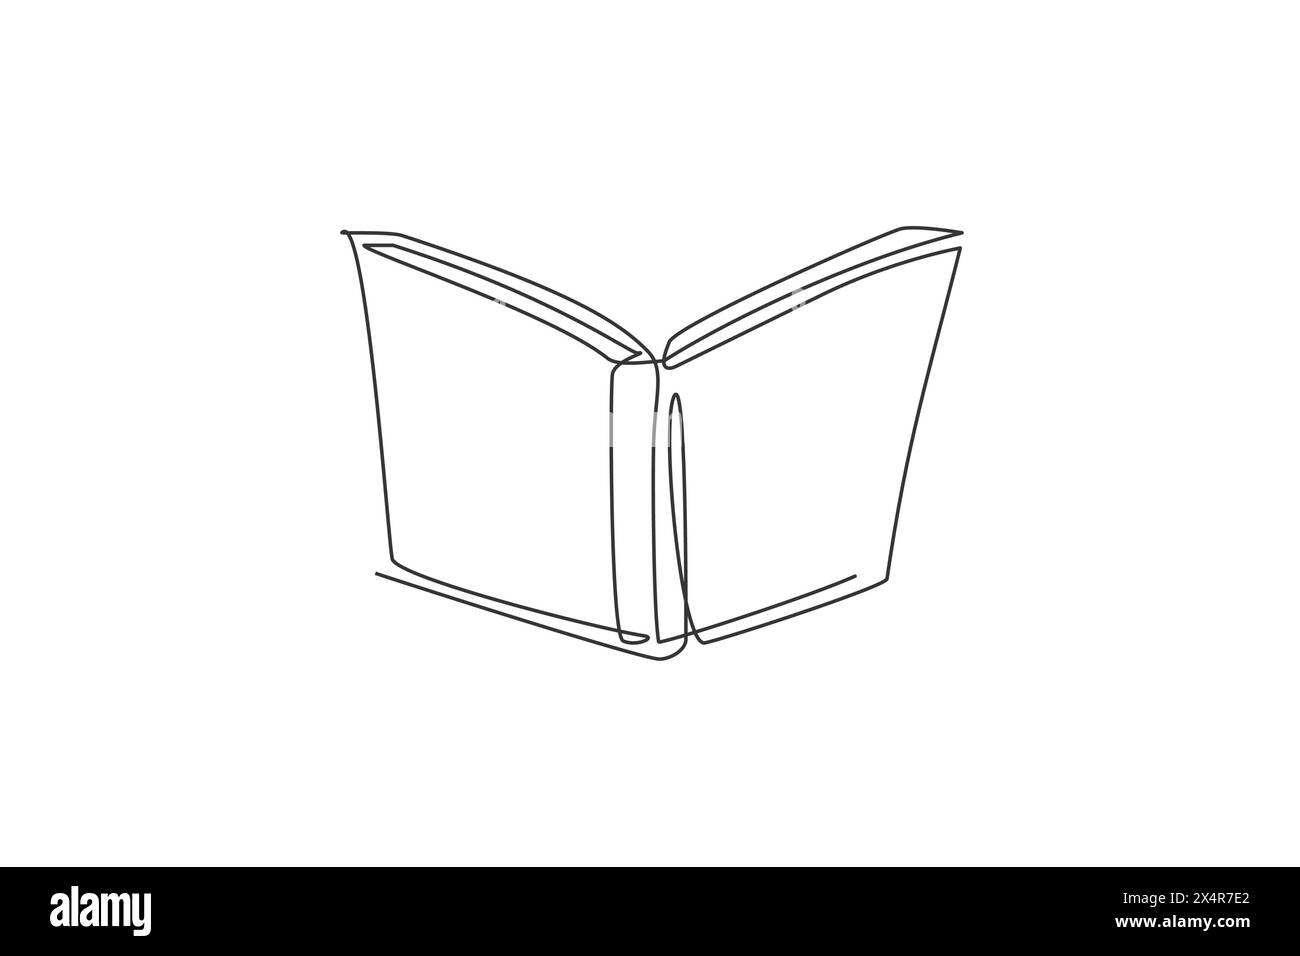 Single continuous line drawing of open book for public library logo label. Window of knowledge logotype icon concept. Modern one line draw graphic des Stock Vector